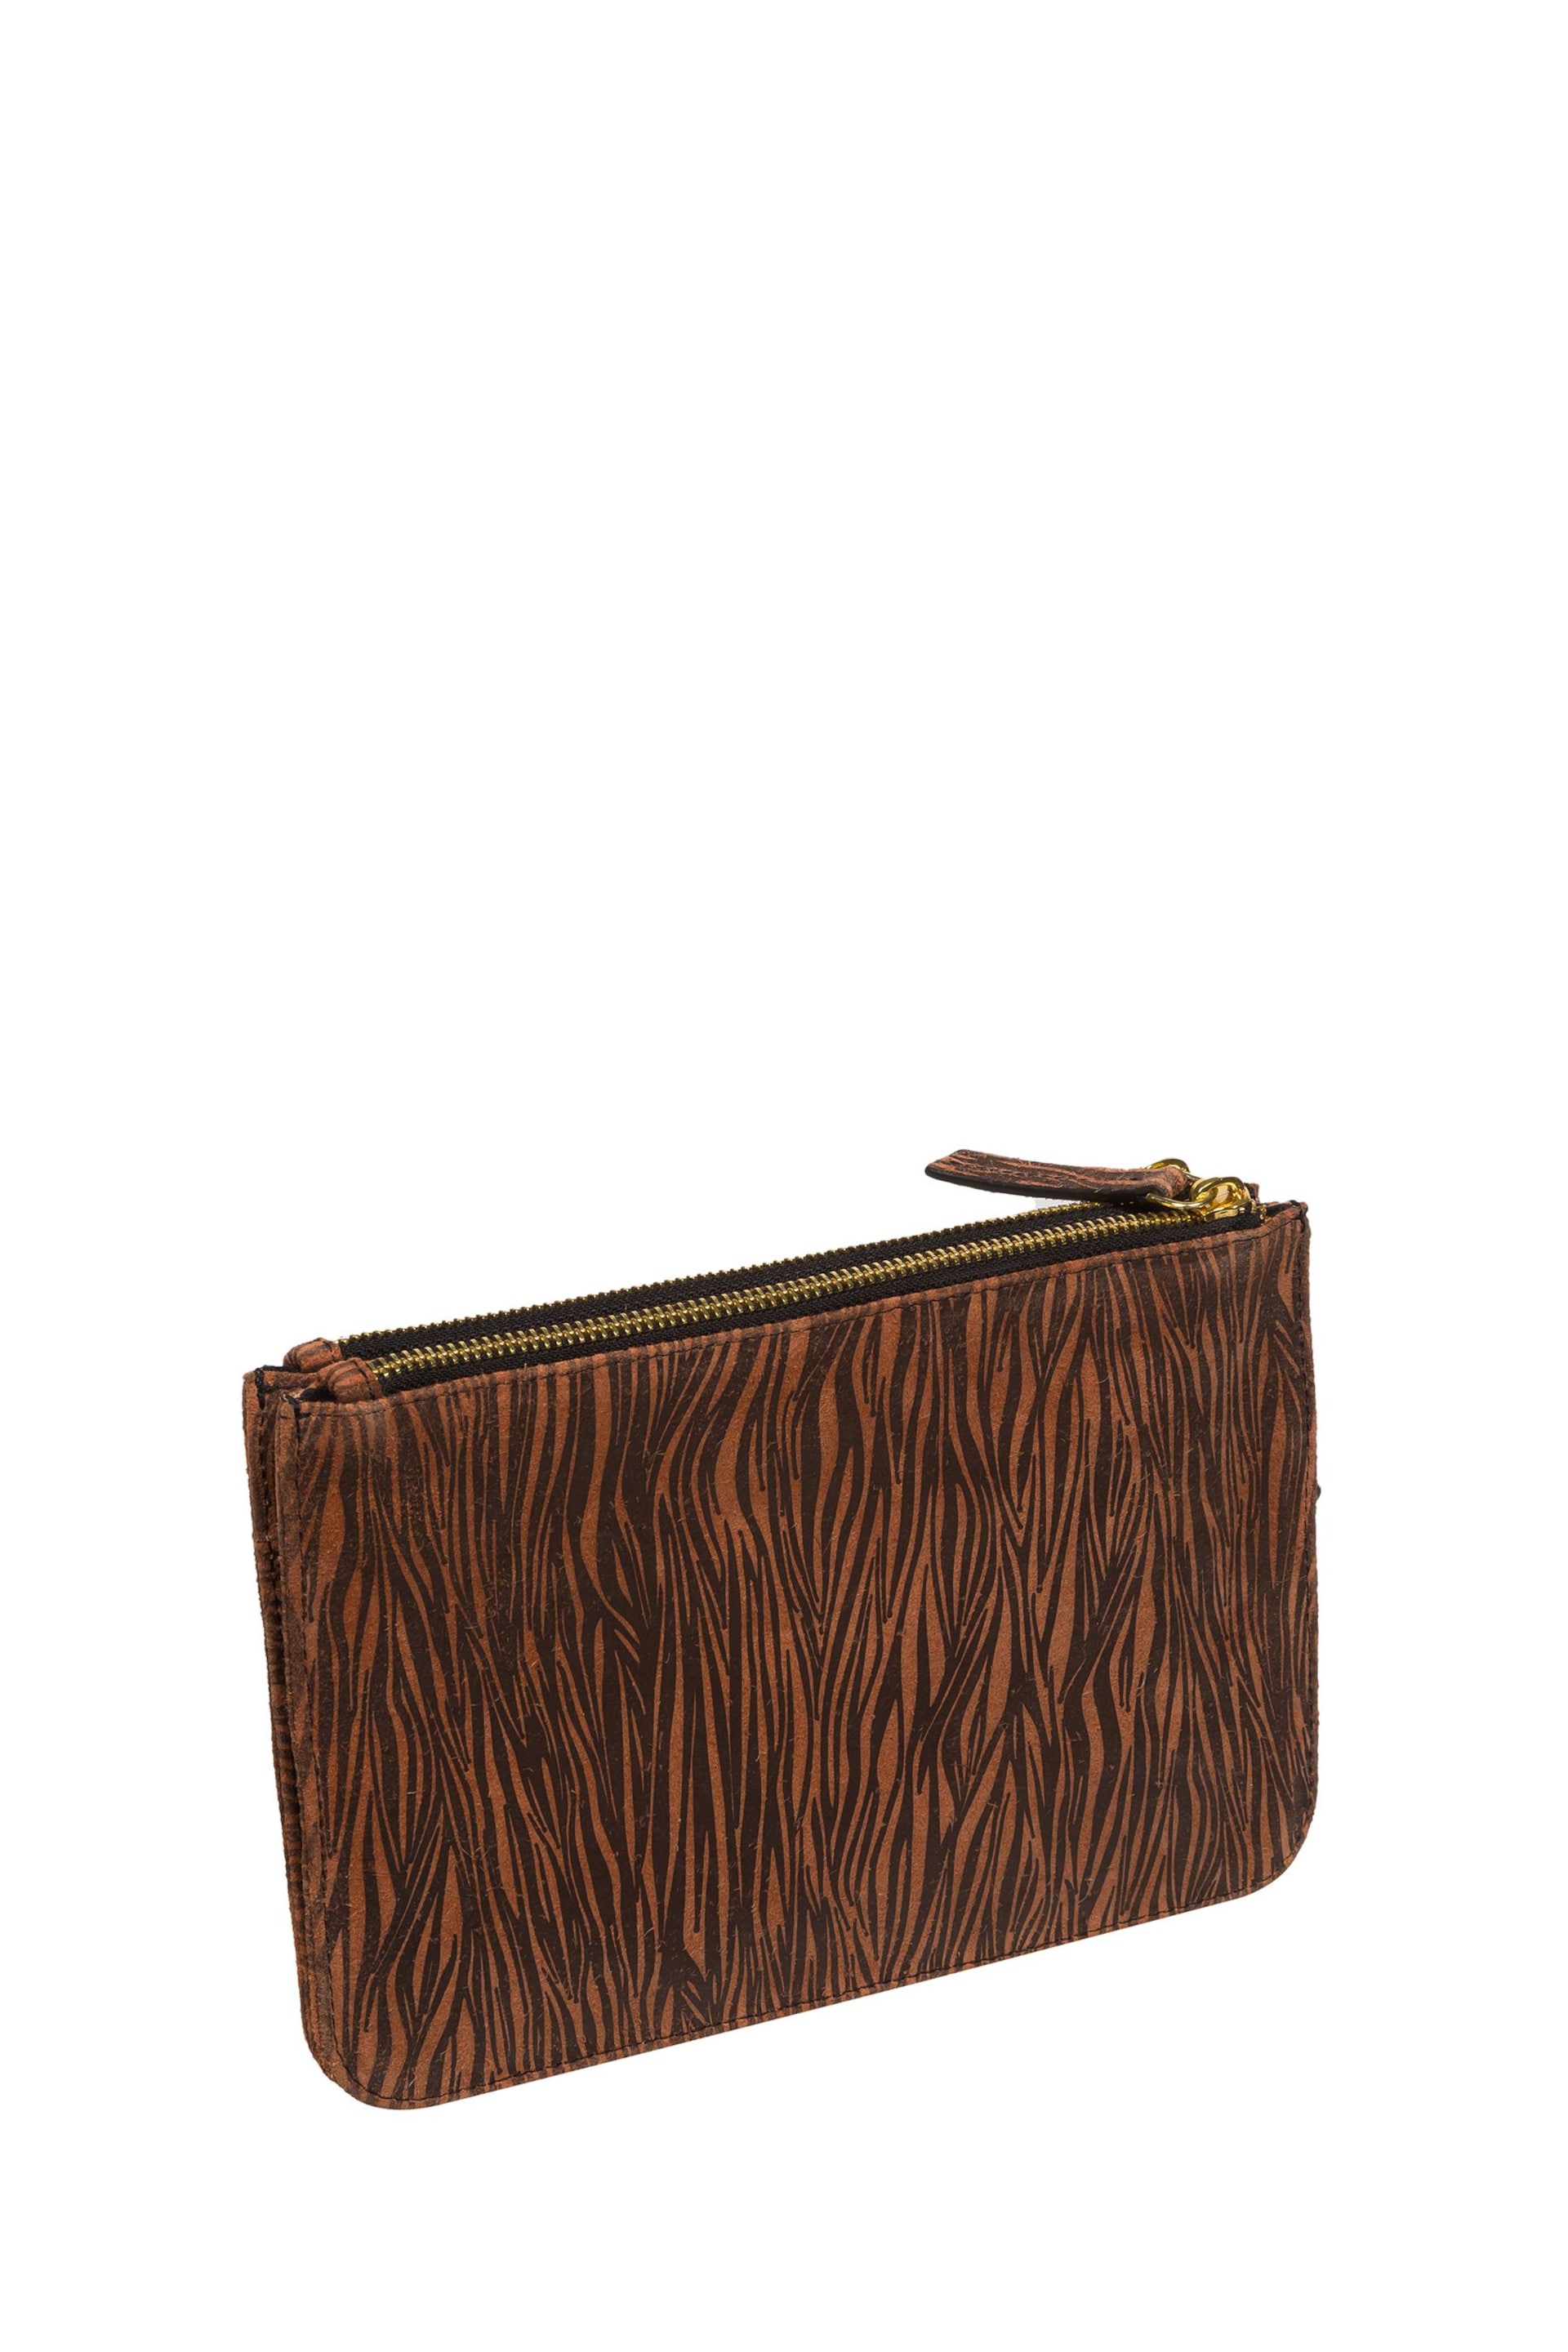 Pure Luxuries London Addison Nappa Leather Clutch Bag - Image 4 of 6